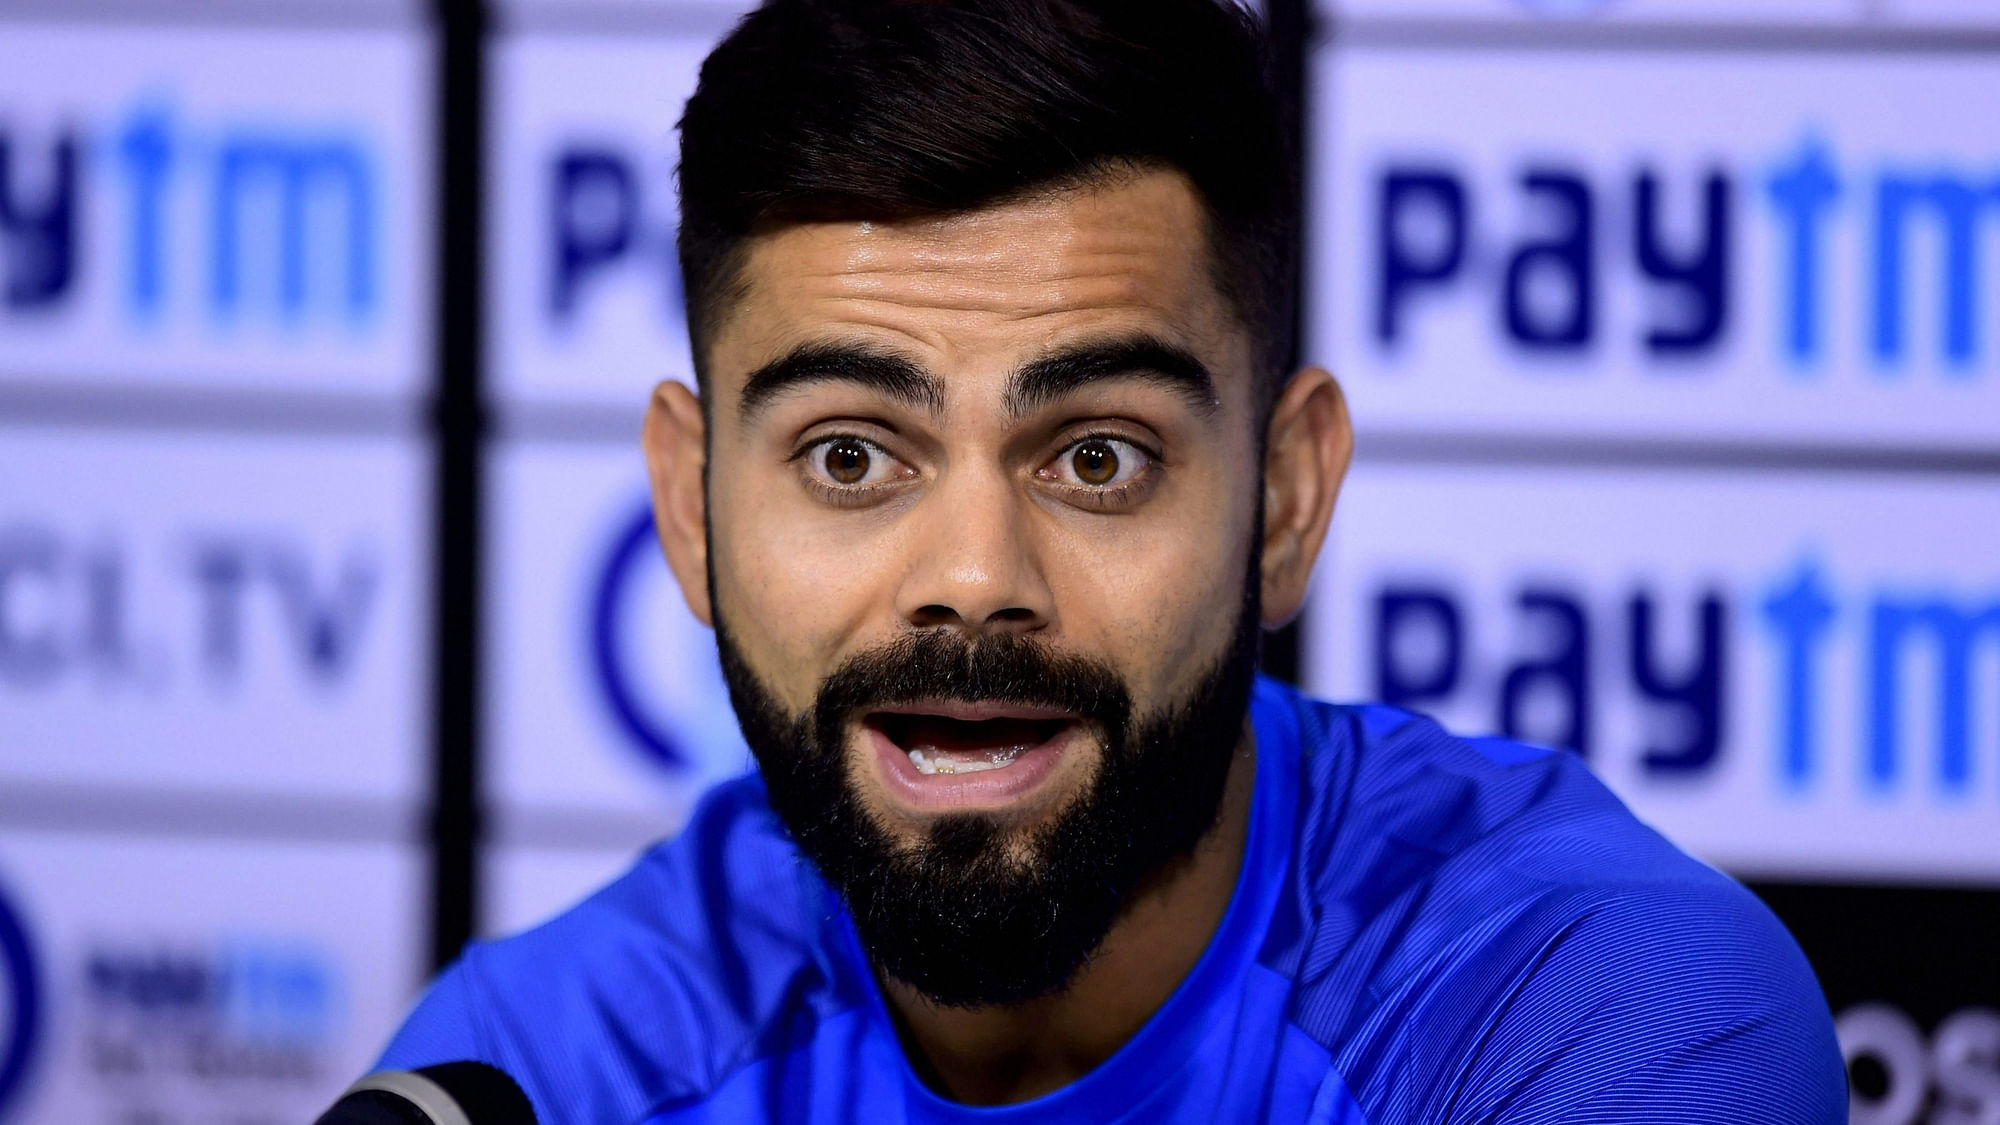 Virat Kohli said India will be playing Prithvi Shaw and Mayank Agarwal as openers in the first ODI vs New Zealand.